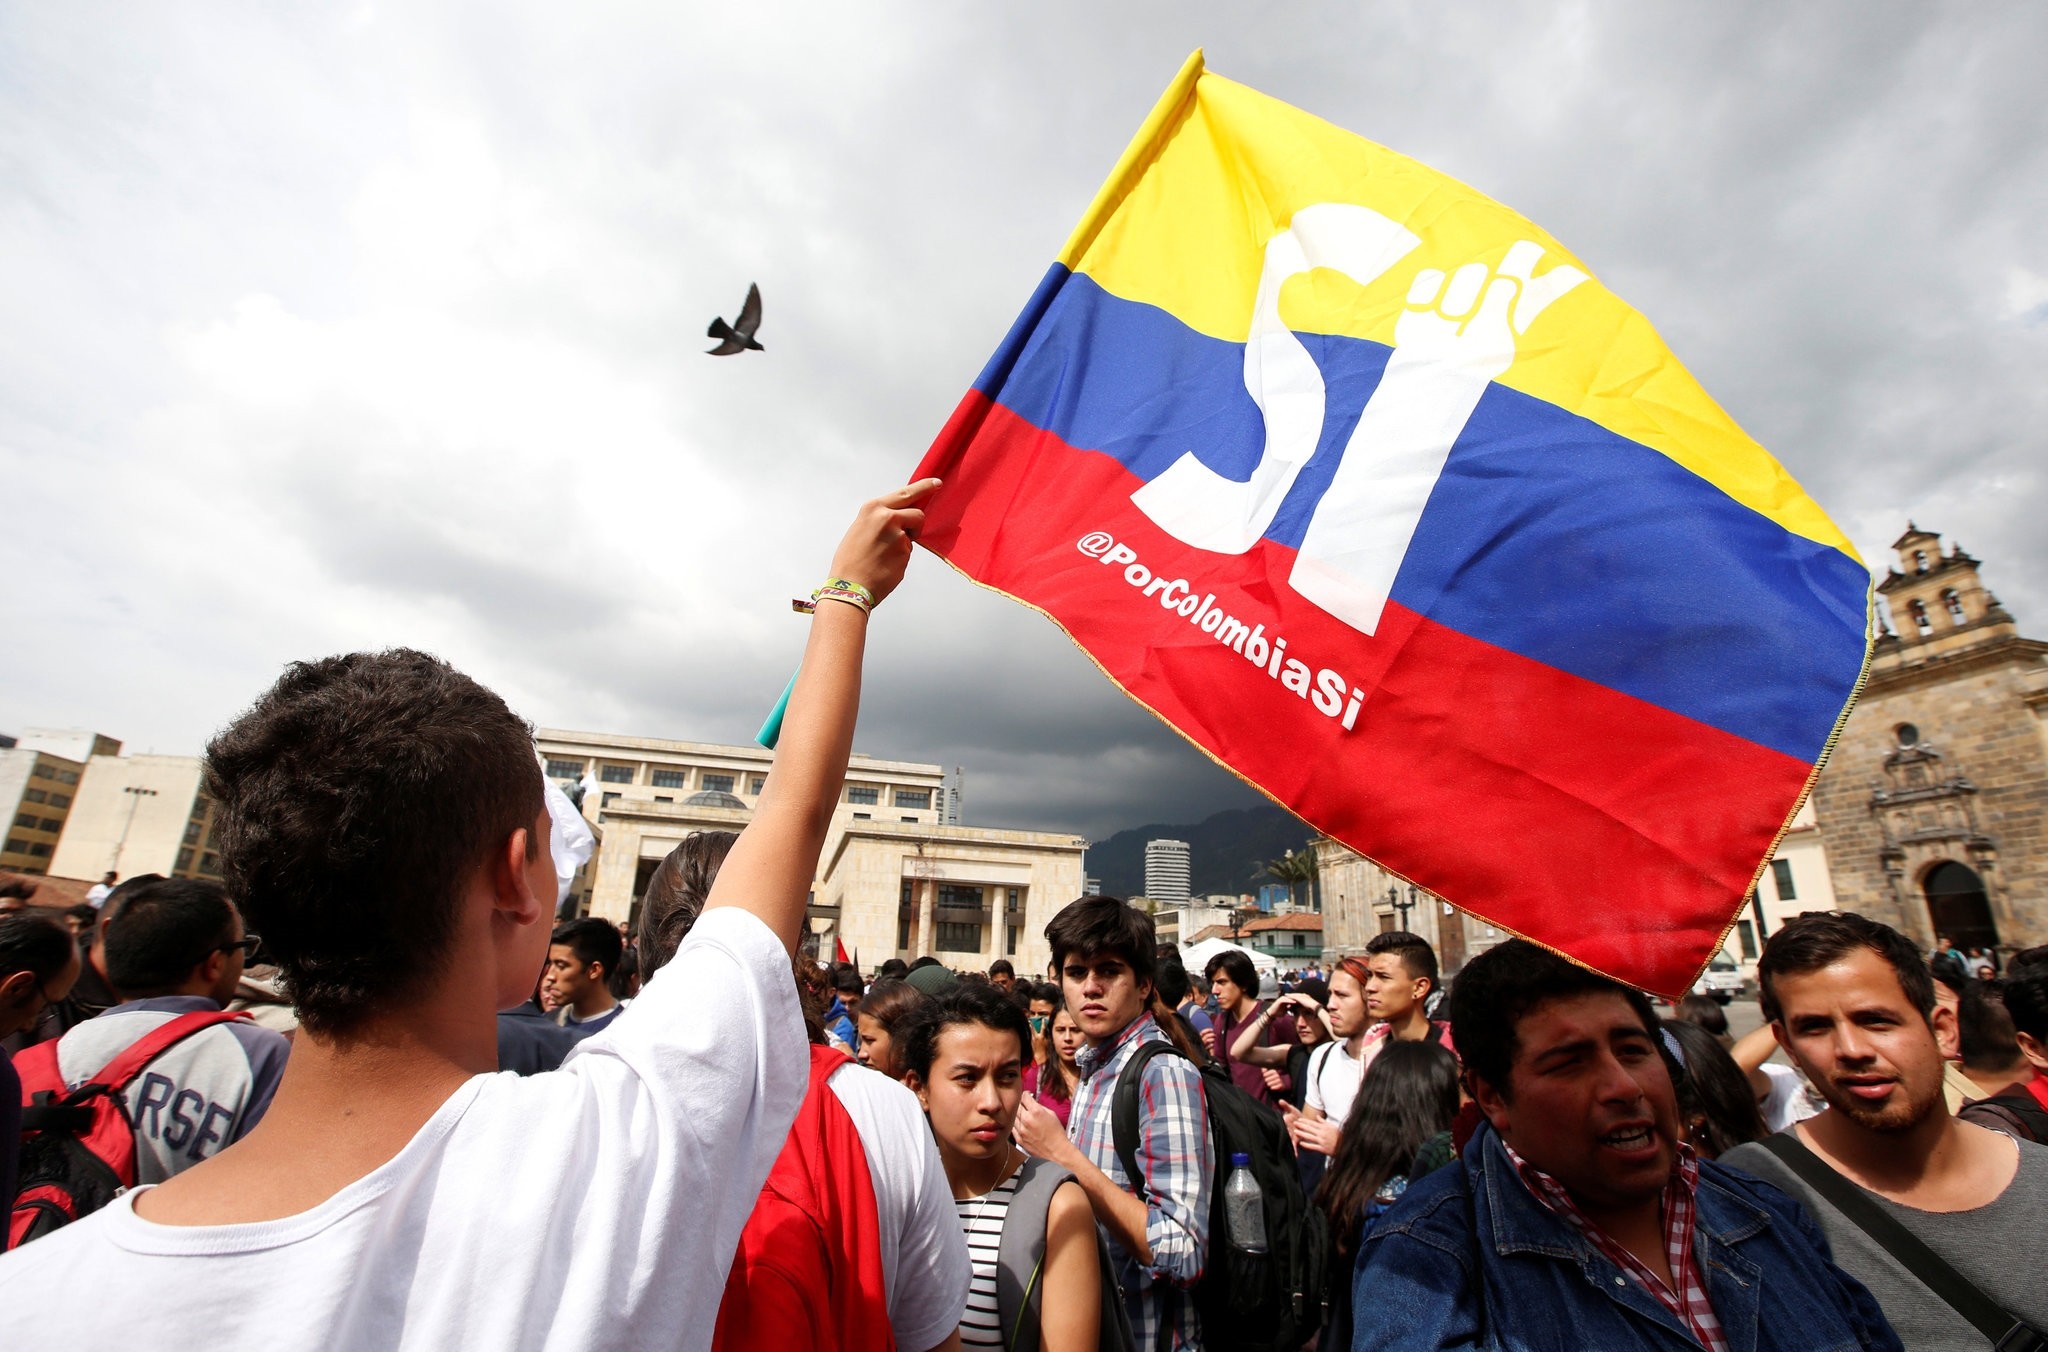 University students and supporters of the peace deal signed between the government and Revolutionary Armed Forces of Colombia (FARC) guerillas display a flag during a rally in front of Congress in Bogota, Colombia Oct. 3, 2016. (REUTERS Photo)